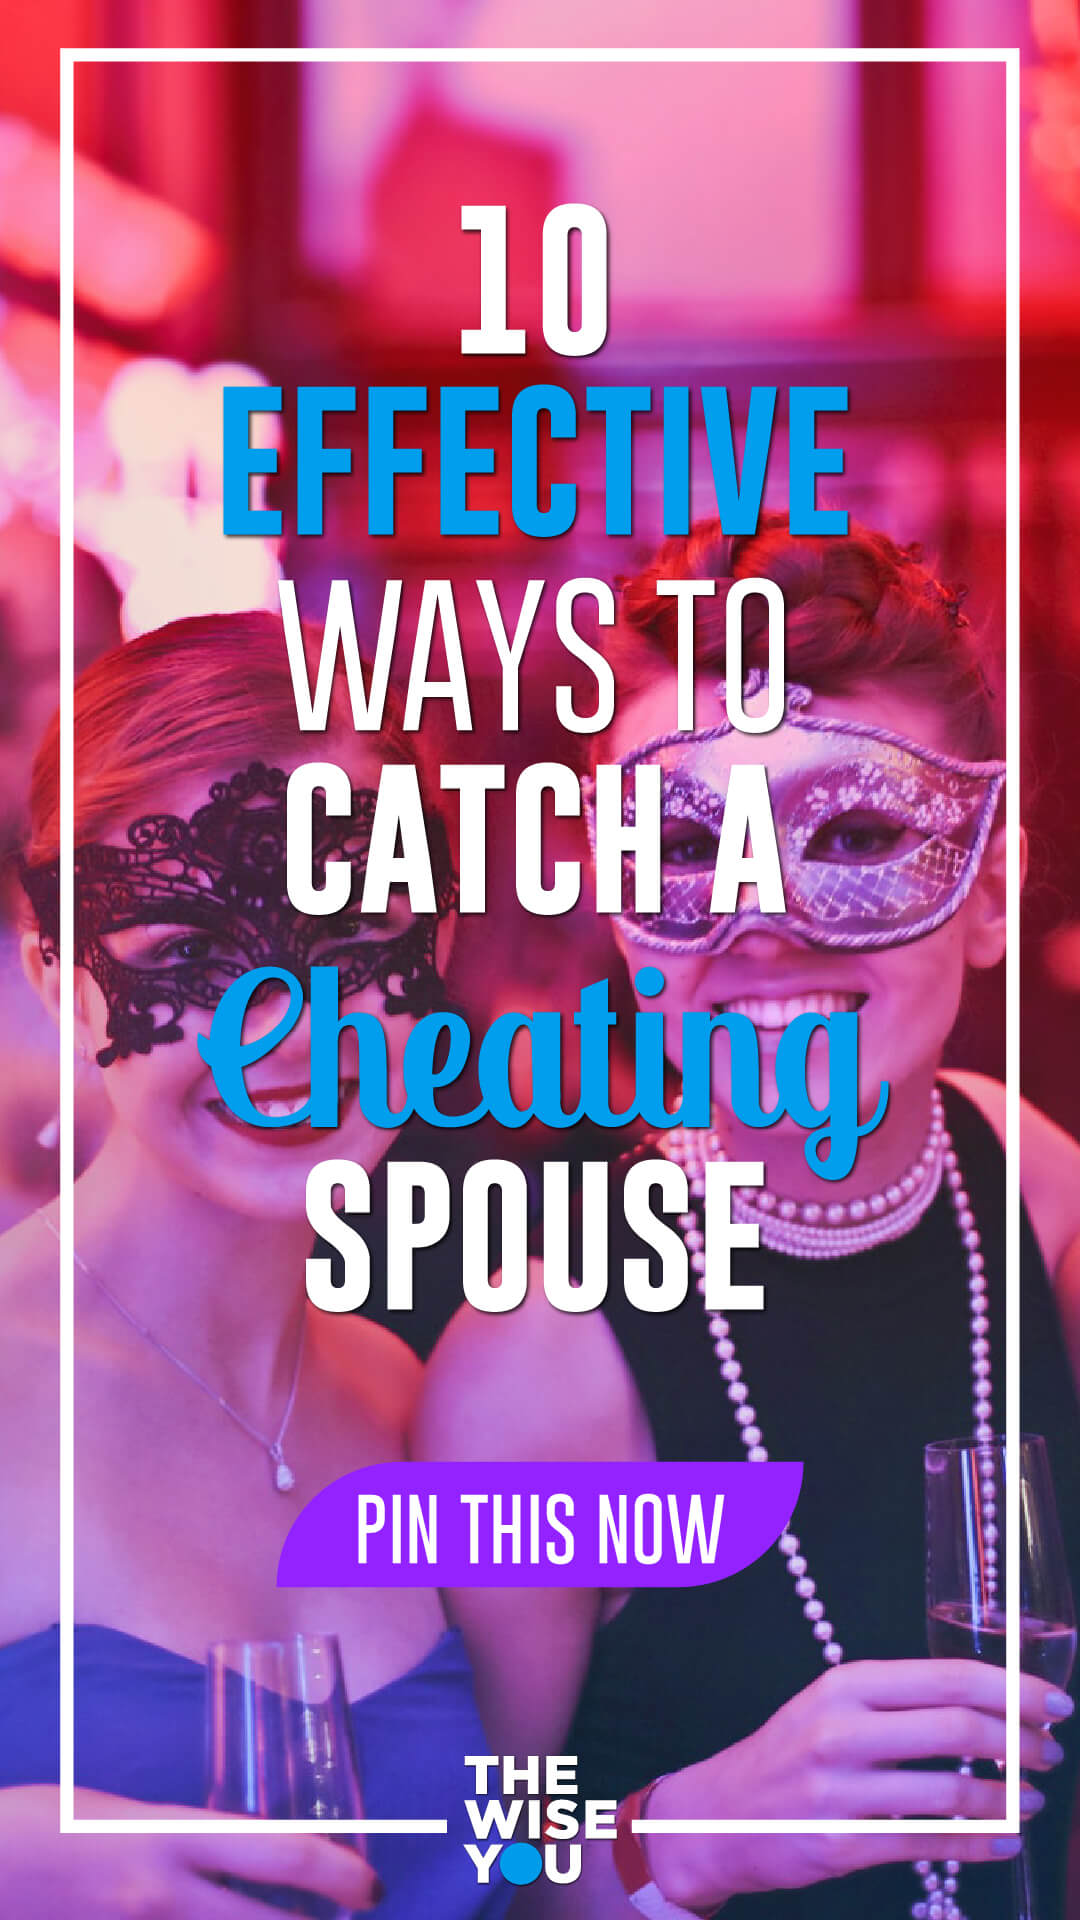 10 Effective Ways to Catch a Cheating Spouse